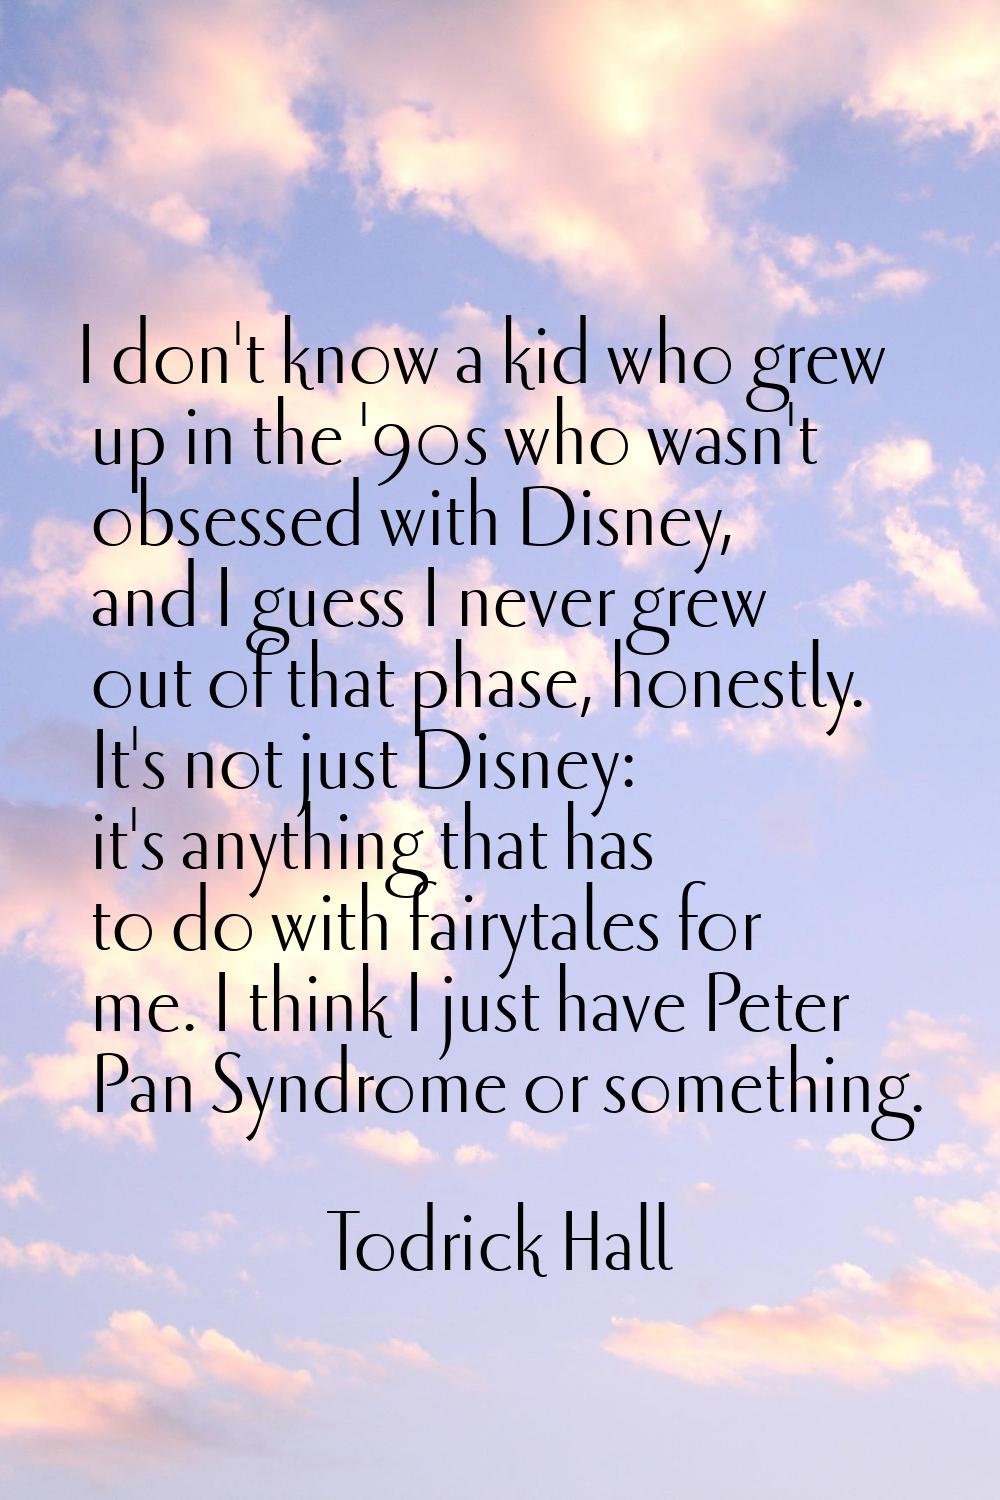 I don't know a kid who grew up in the '90s who wasn't obsessed with Disney, and I guess I never gre